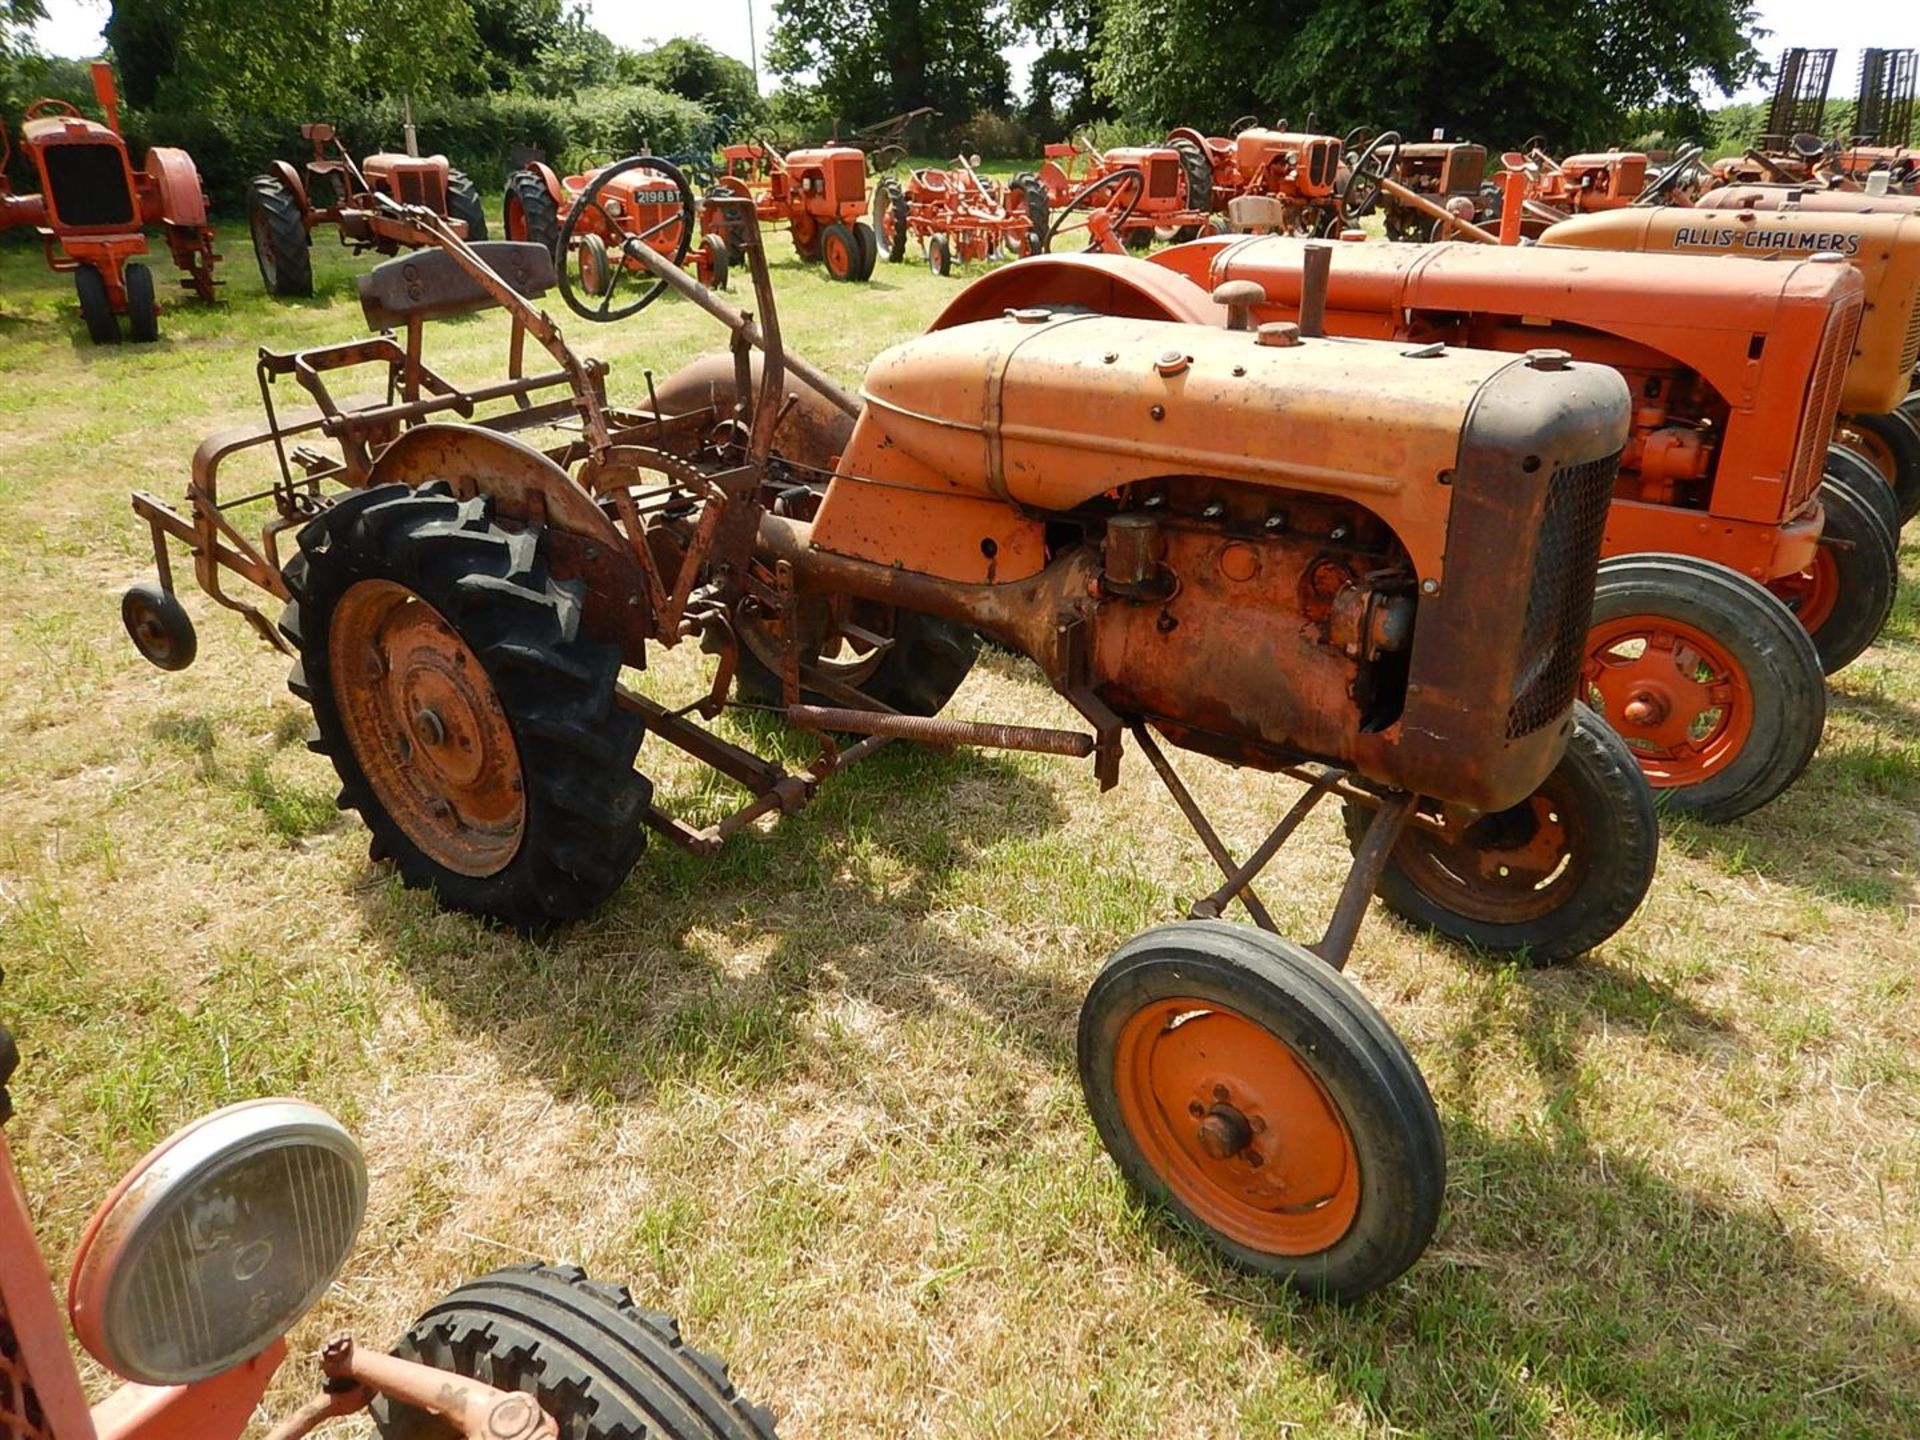 ALLIS CHALMERS Model B 4cylinder petrol/paraffin TRACTOR Reg. No. EAB 630 (expired) Fitted with an